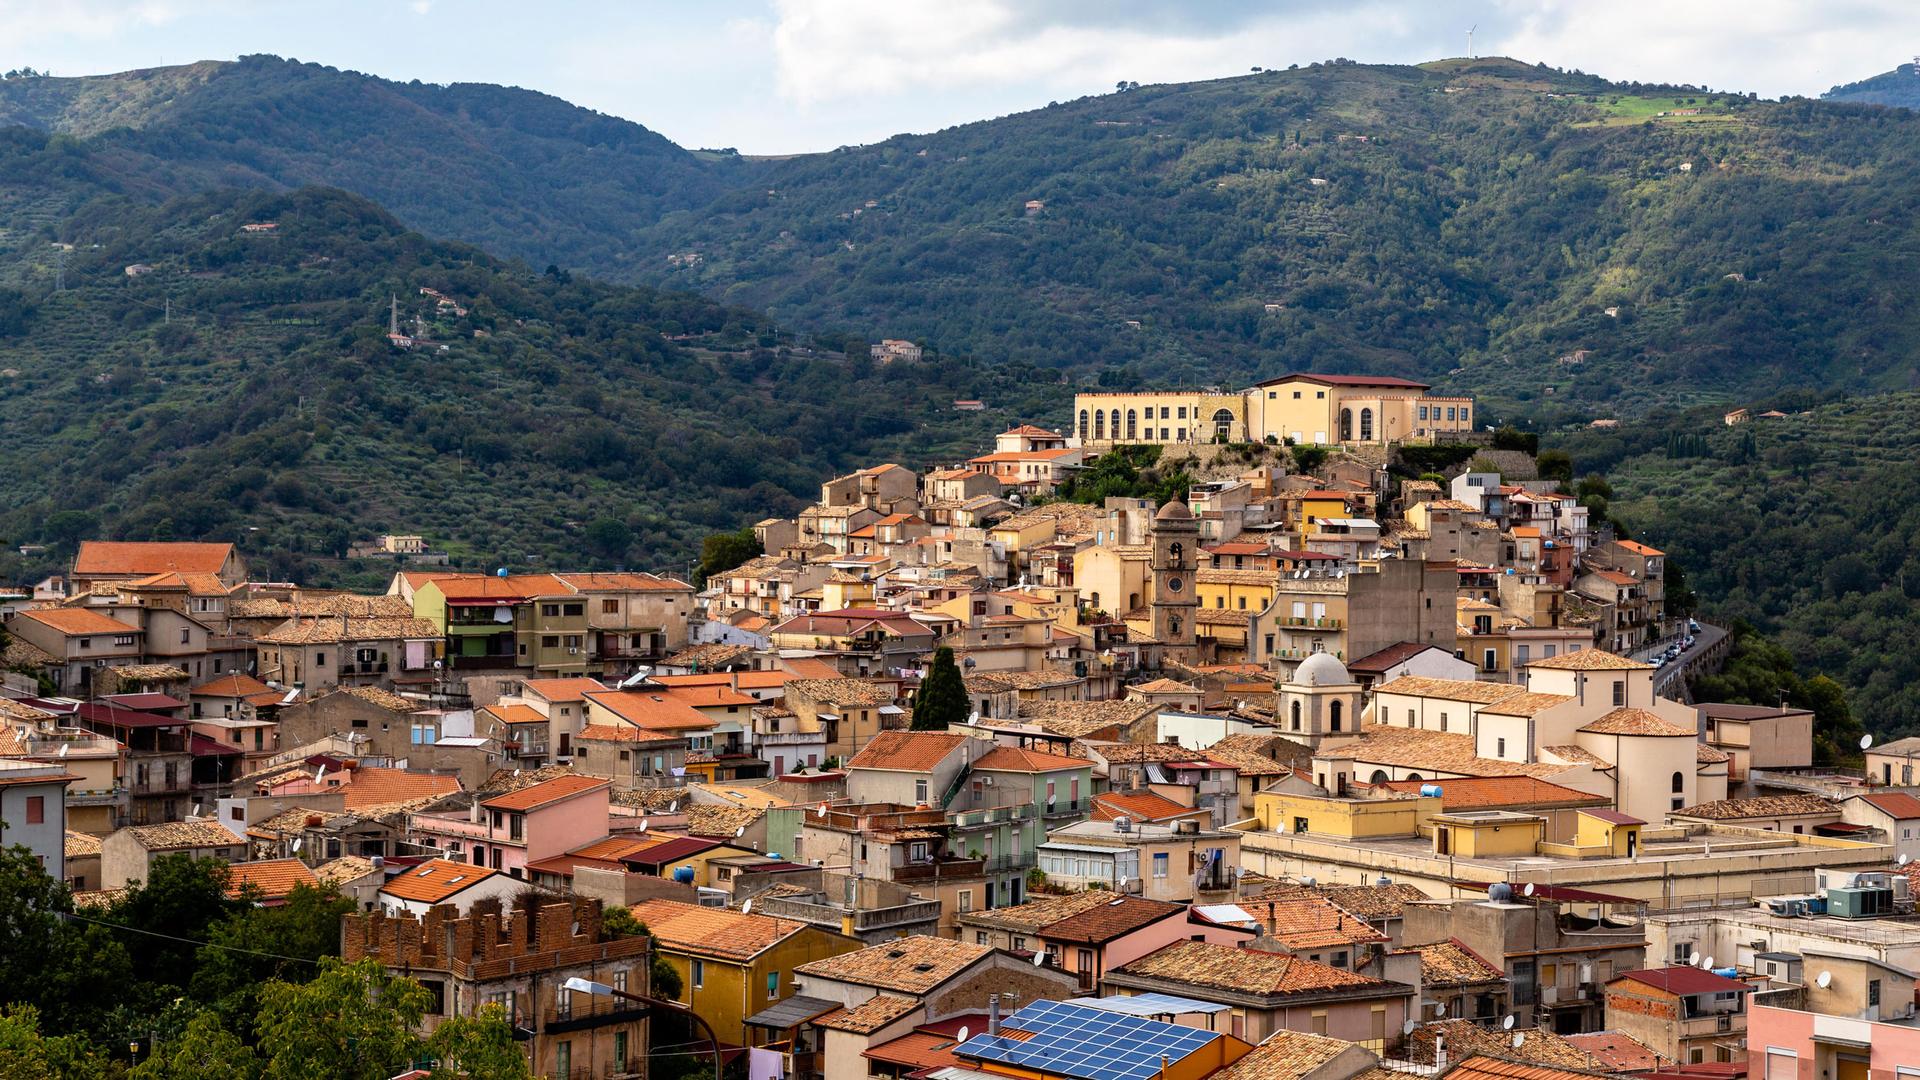 An old Italian town of San Piero Patti is shown from above with the rooftops of homes built into the lush green hillside.